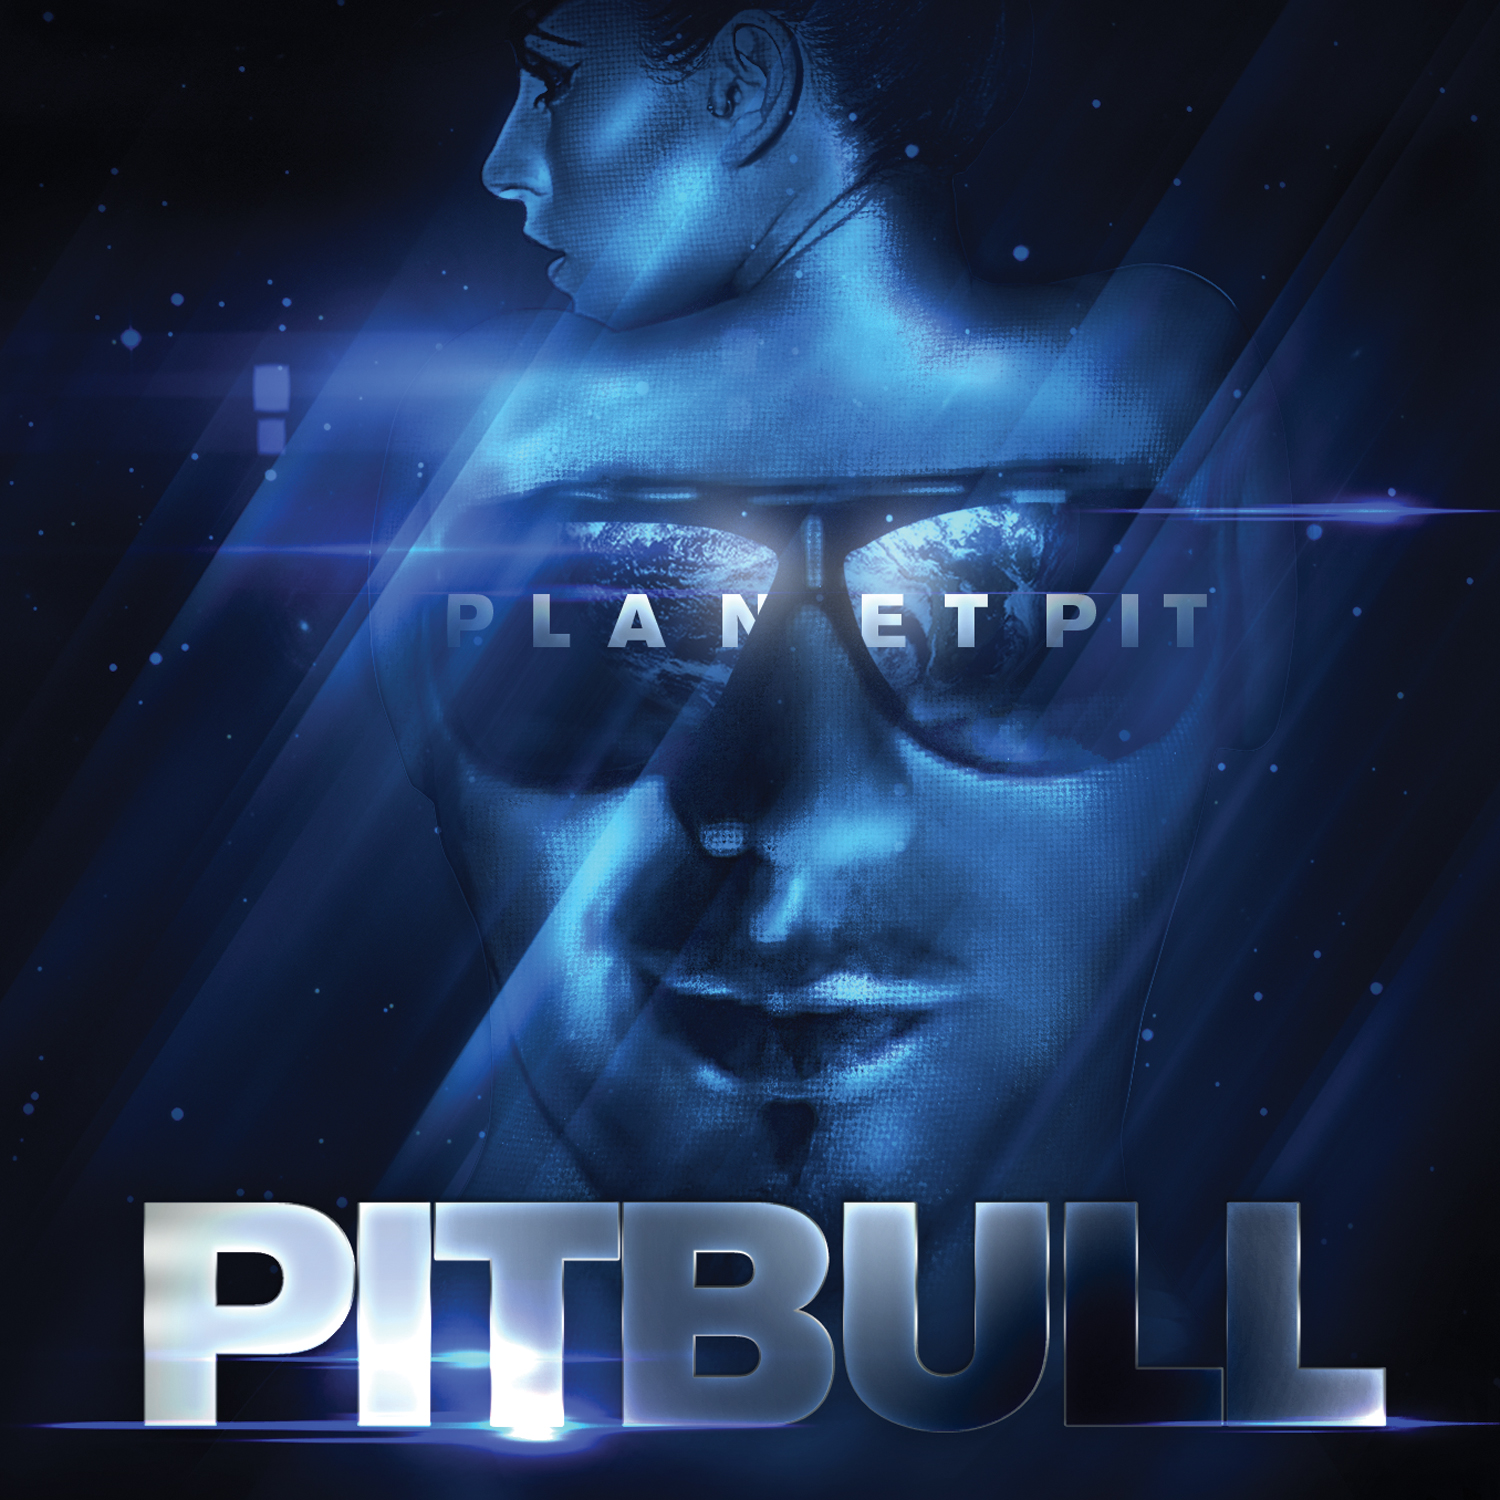 Pitbull Pit Official Album Covers